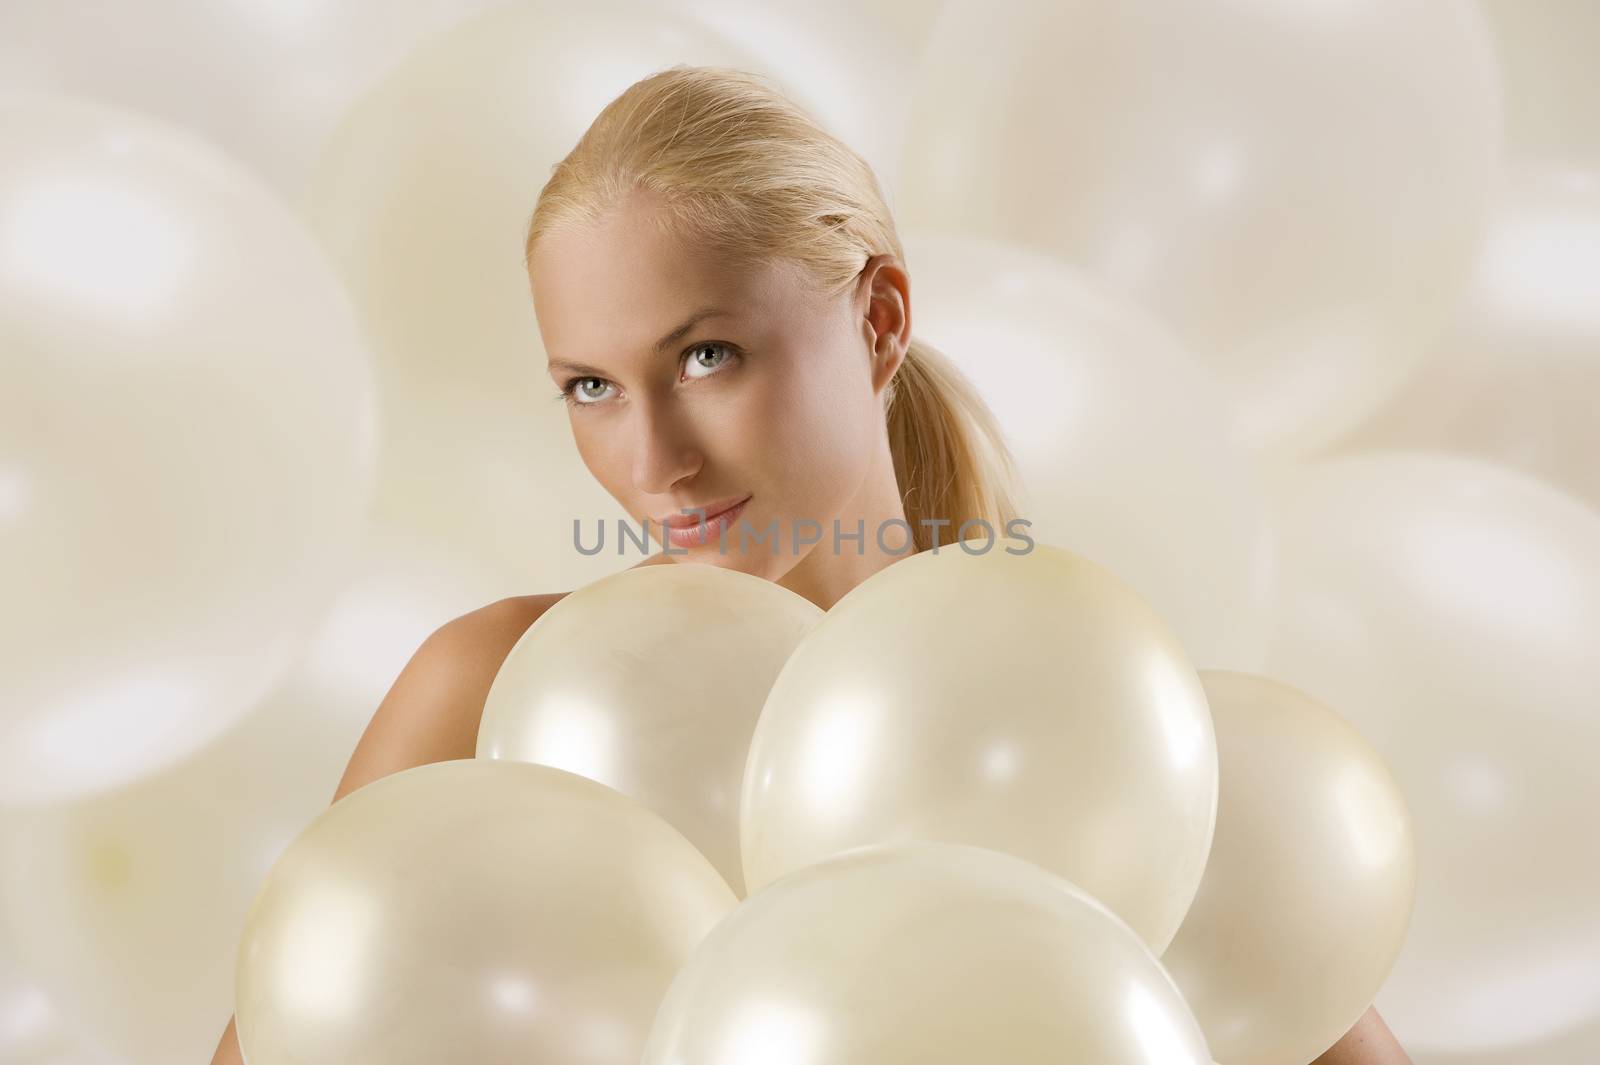 beautiful blond woman between white air balloons looking up